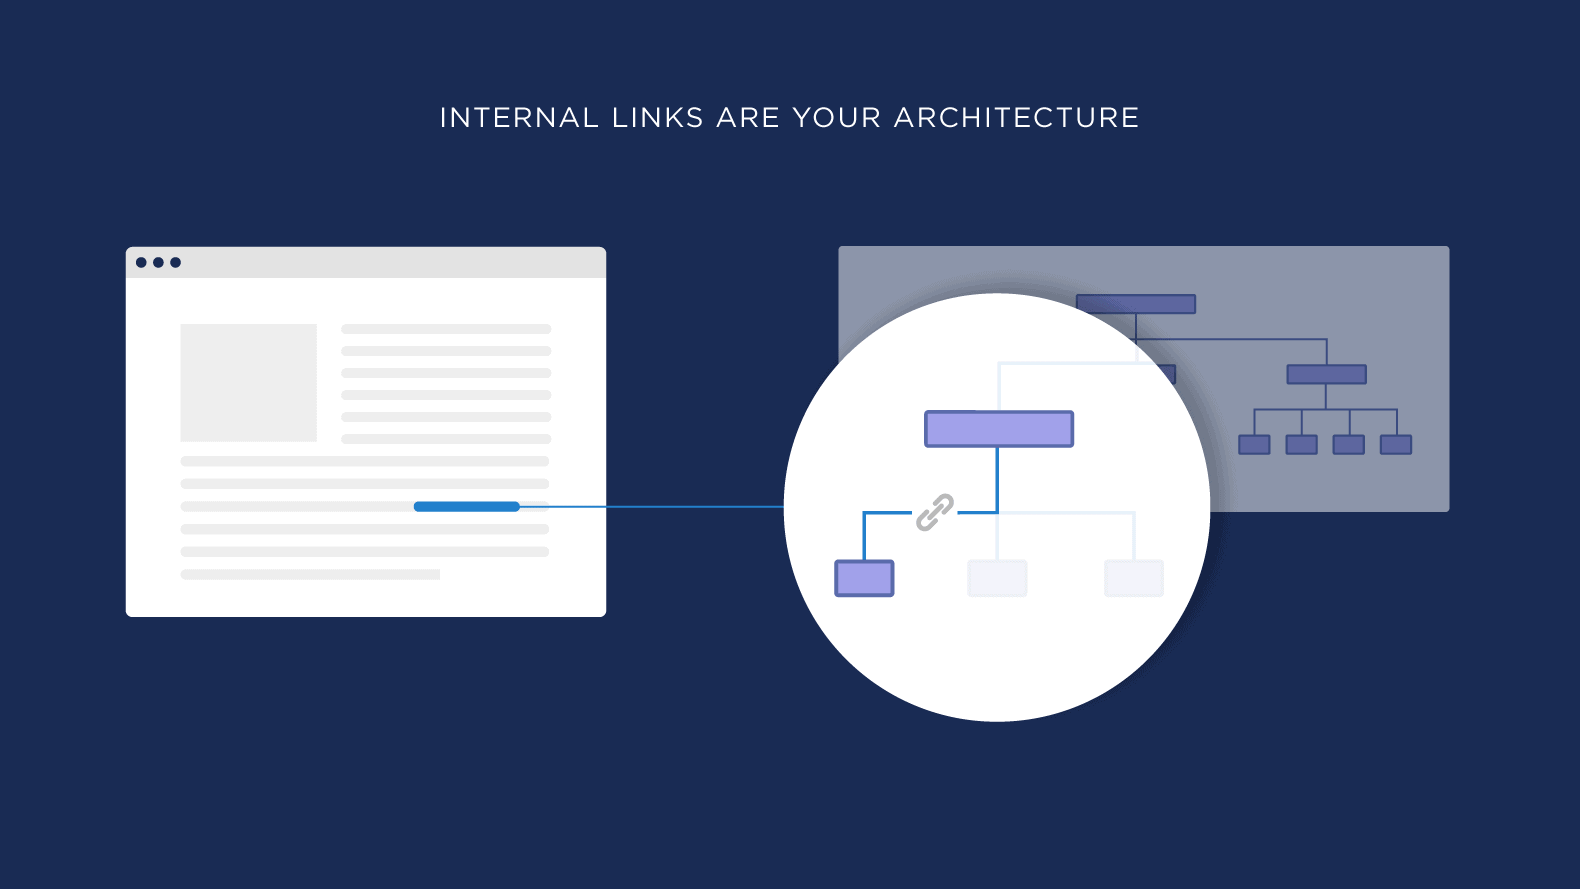 Internal links are your architecture